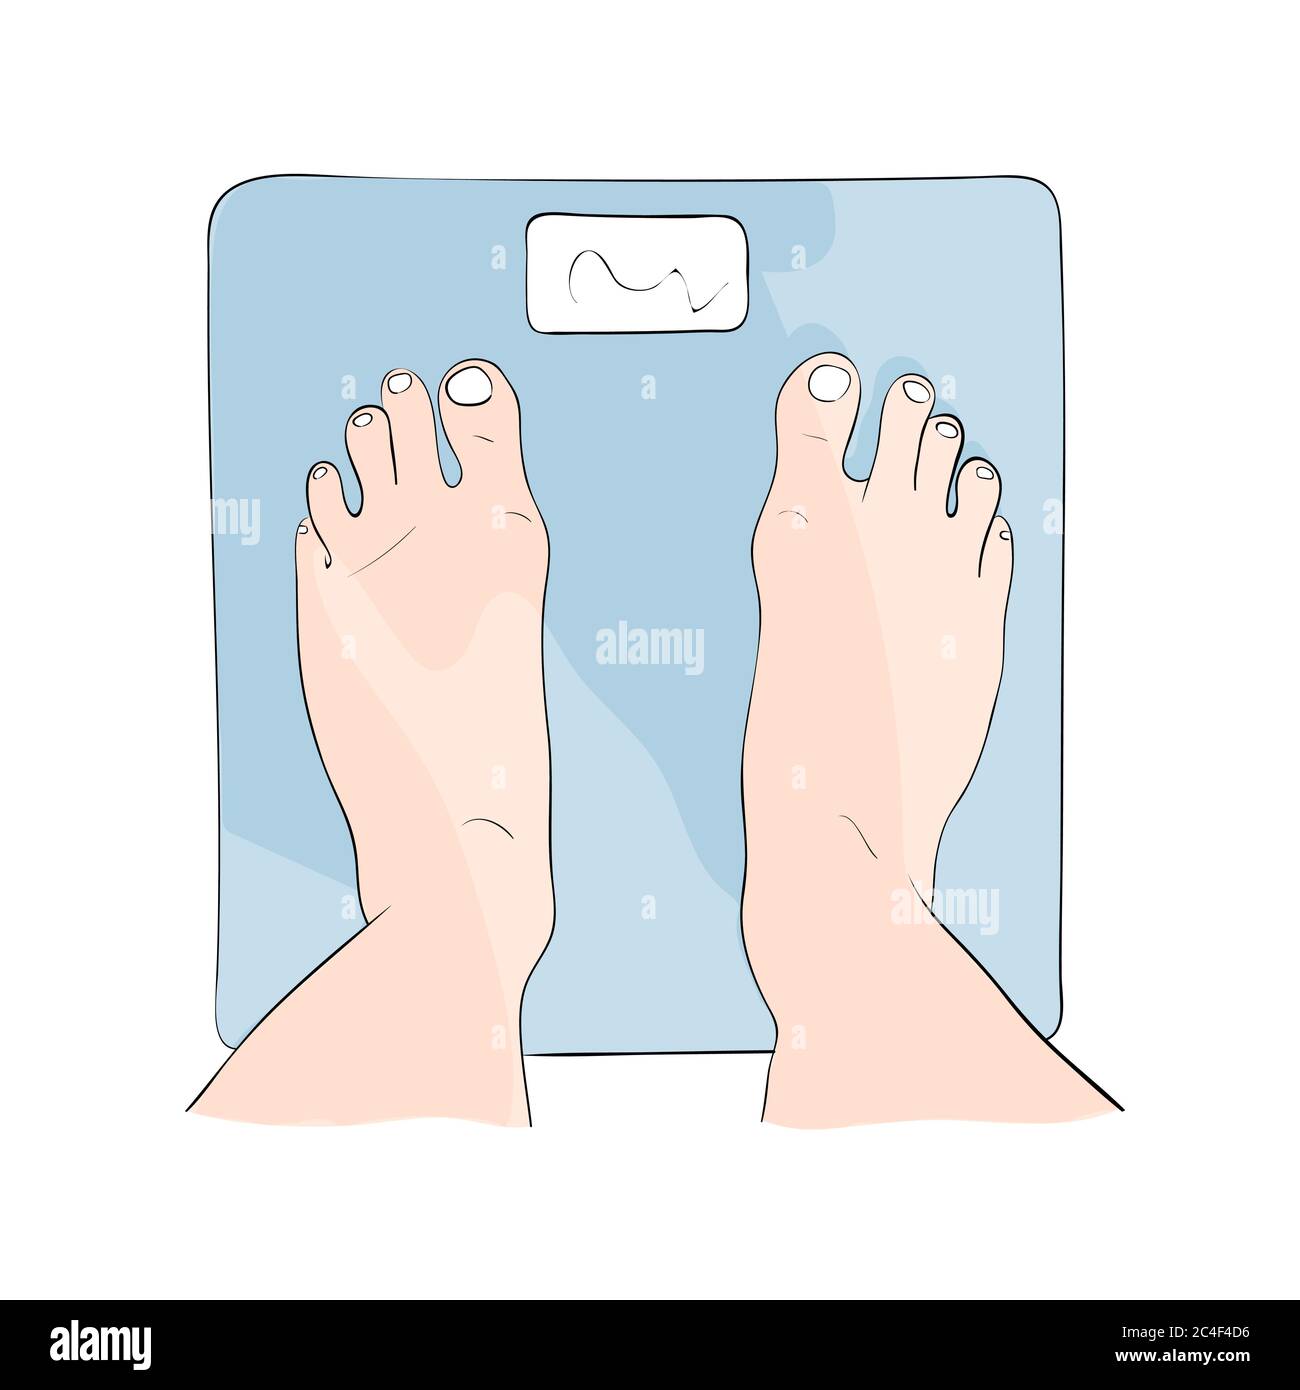 51,000+ Weight Scale Stock Illustrations, Royalty-Free Vector